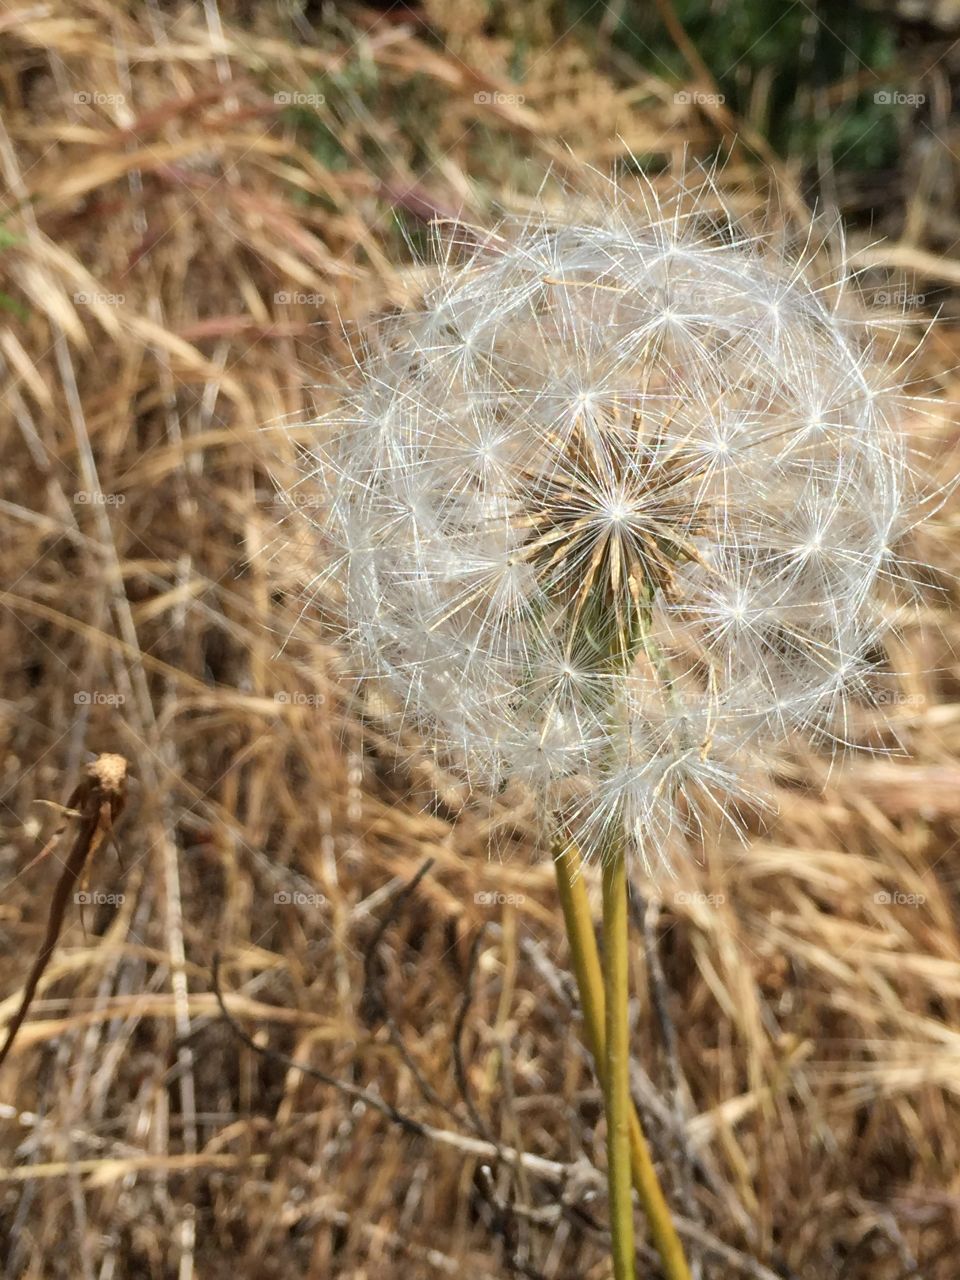 A close up view of a full dandelion found on a hike in california. It’s waiting to be wished upon!